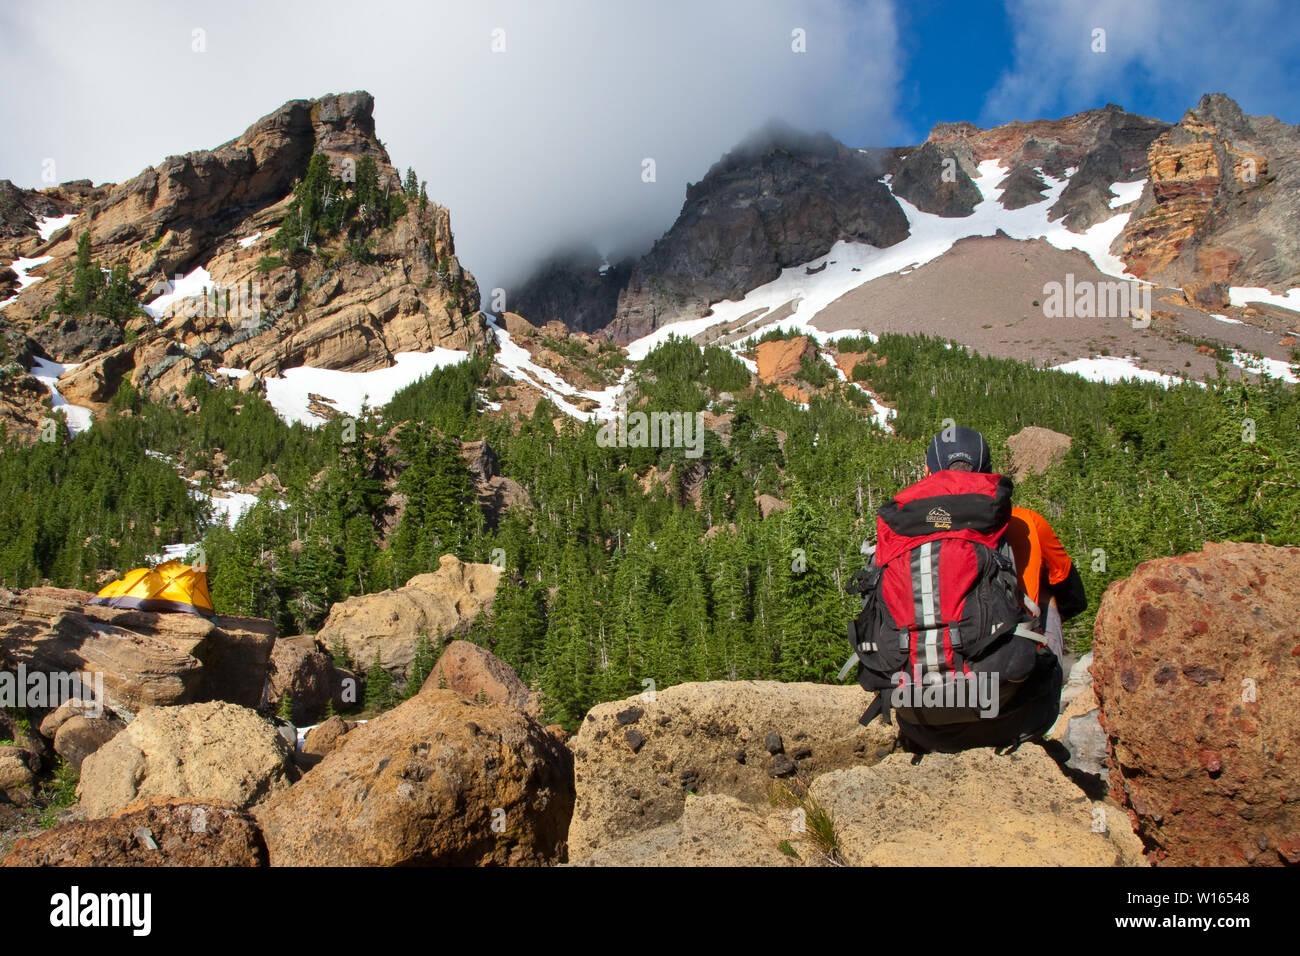 Backpacking in the Mount Washington Wilderness Area Near Bend Oregon Stock Photo